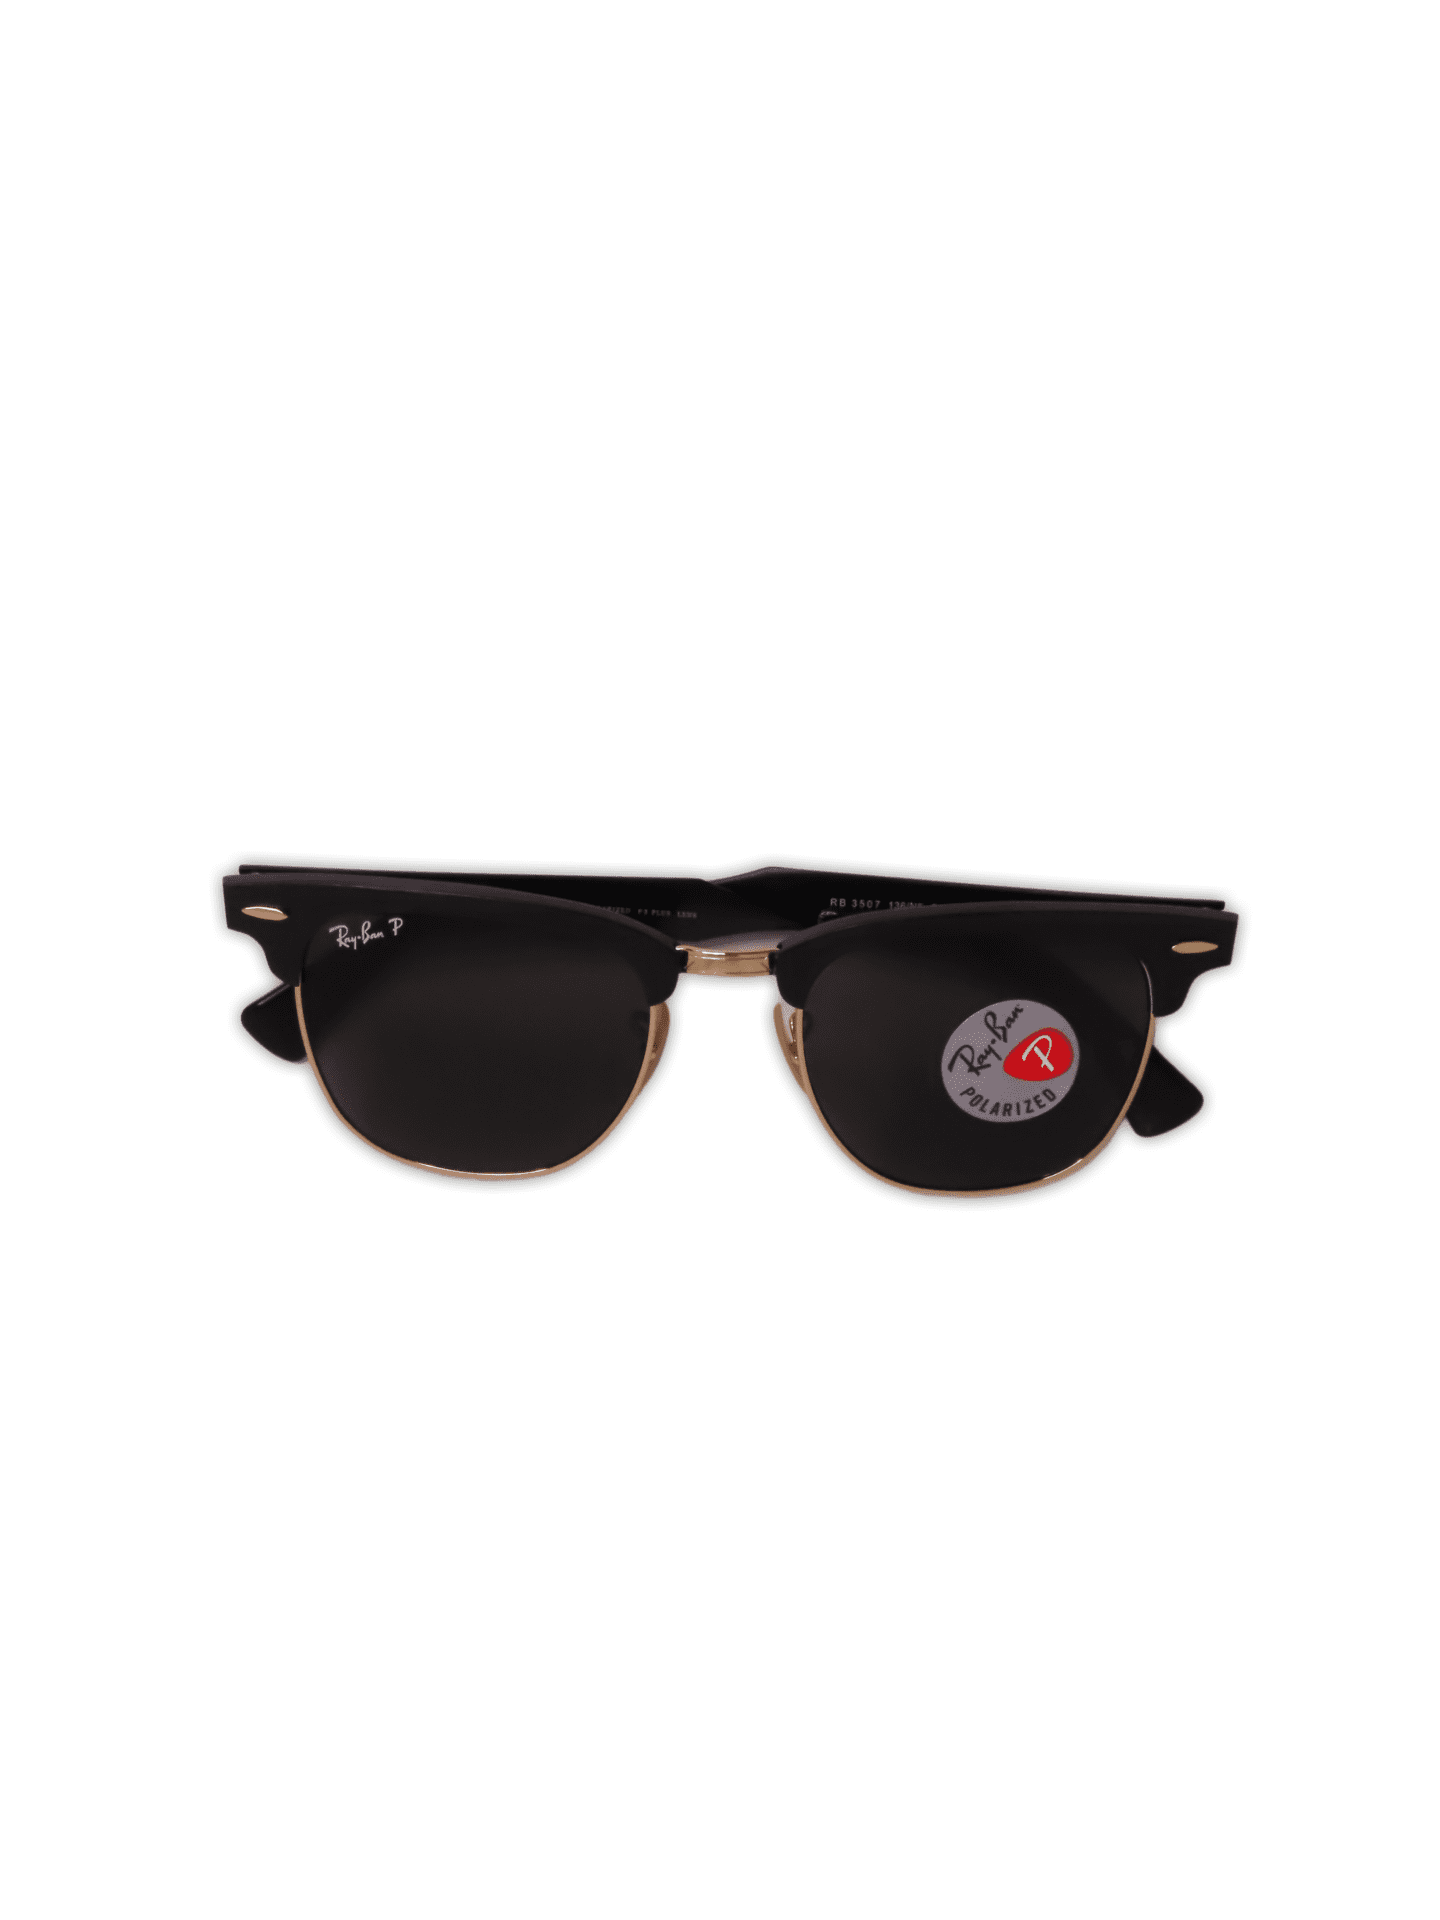 Never fail to make a statement with the Ray-Ban Clubmaster Polarized sunglasses. Inspired by the 50’s, the unmistakable design of the Clubmaster Classic is worn by cultural intellectuals, those who lead the changed tomorrow. Made from Acetate with lens made from glass and features a Black Frame with Metal detail elements. 